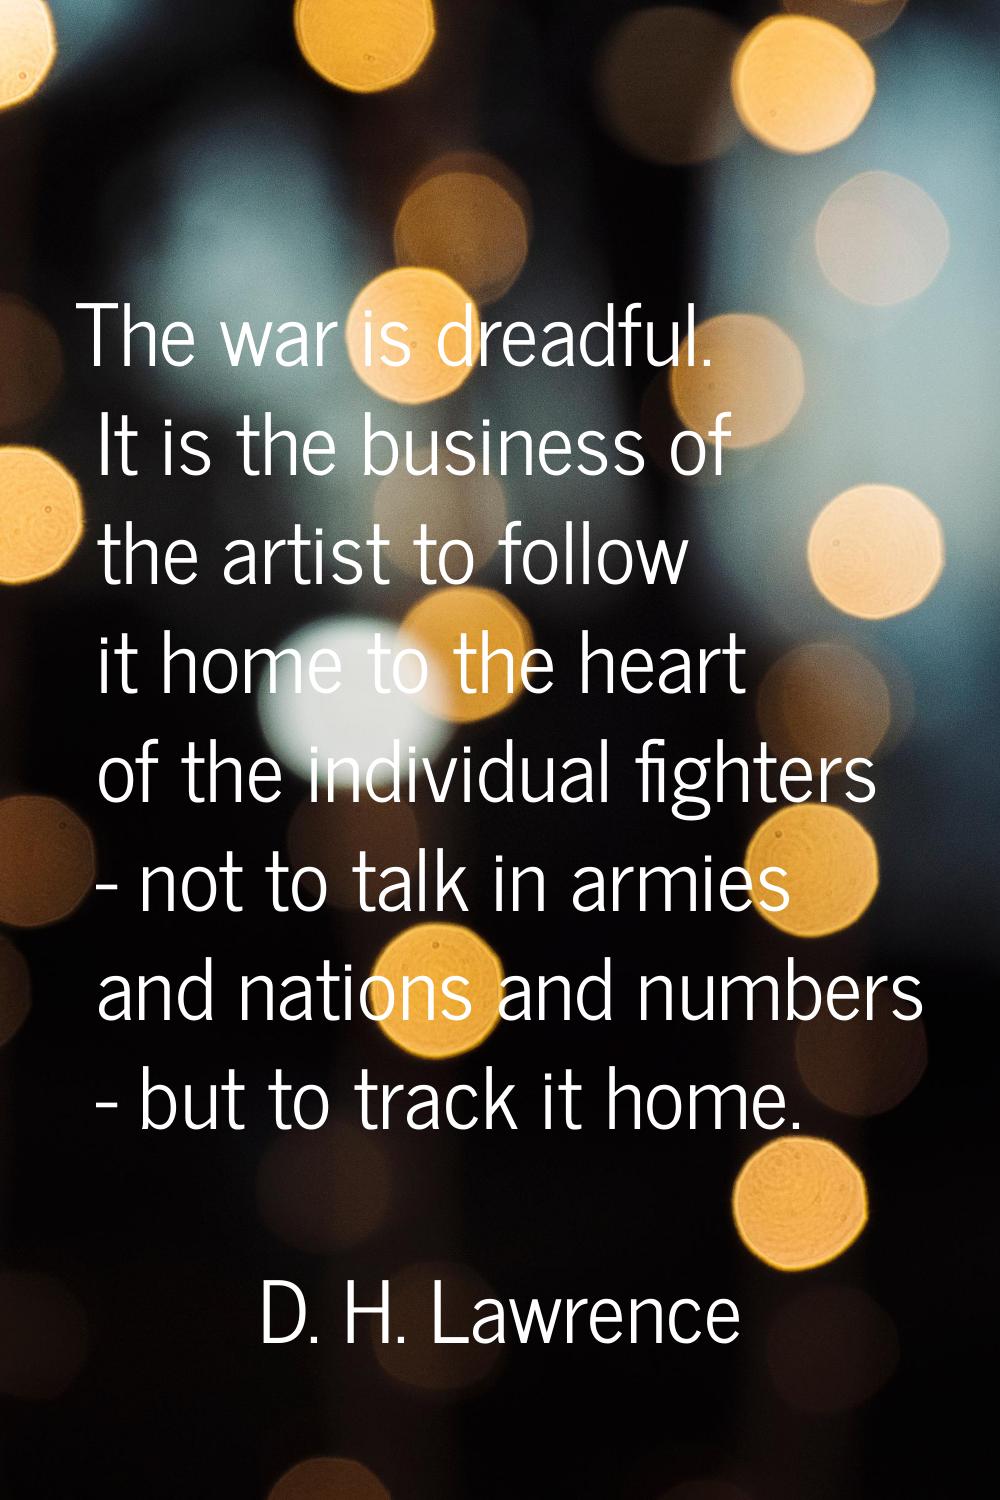 The war is dreadful. It is the business of the artist to follow it home to the heart of the individ